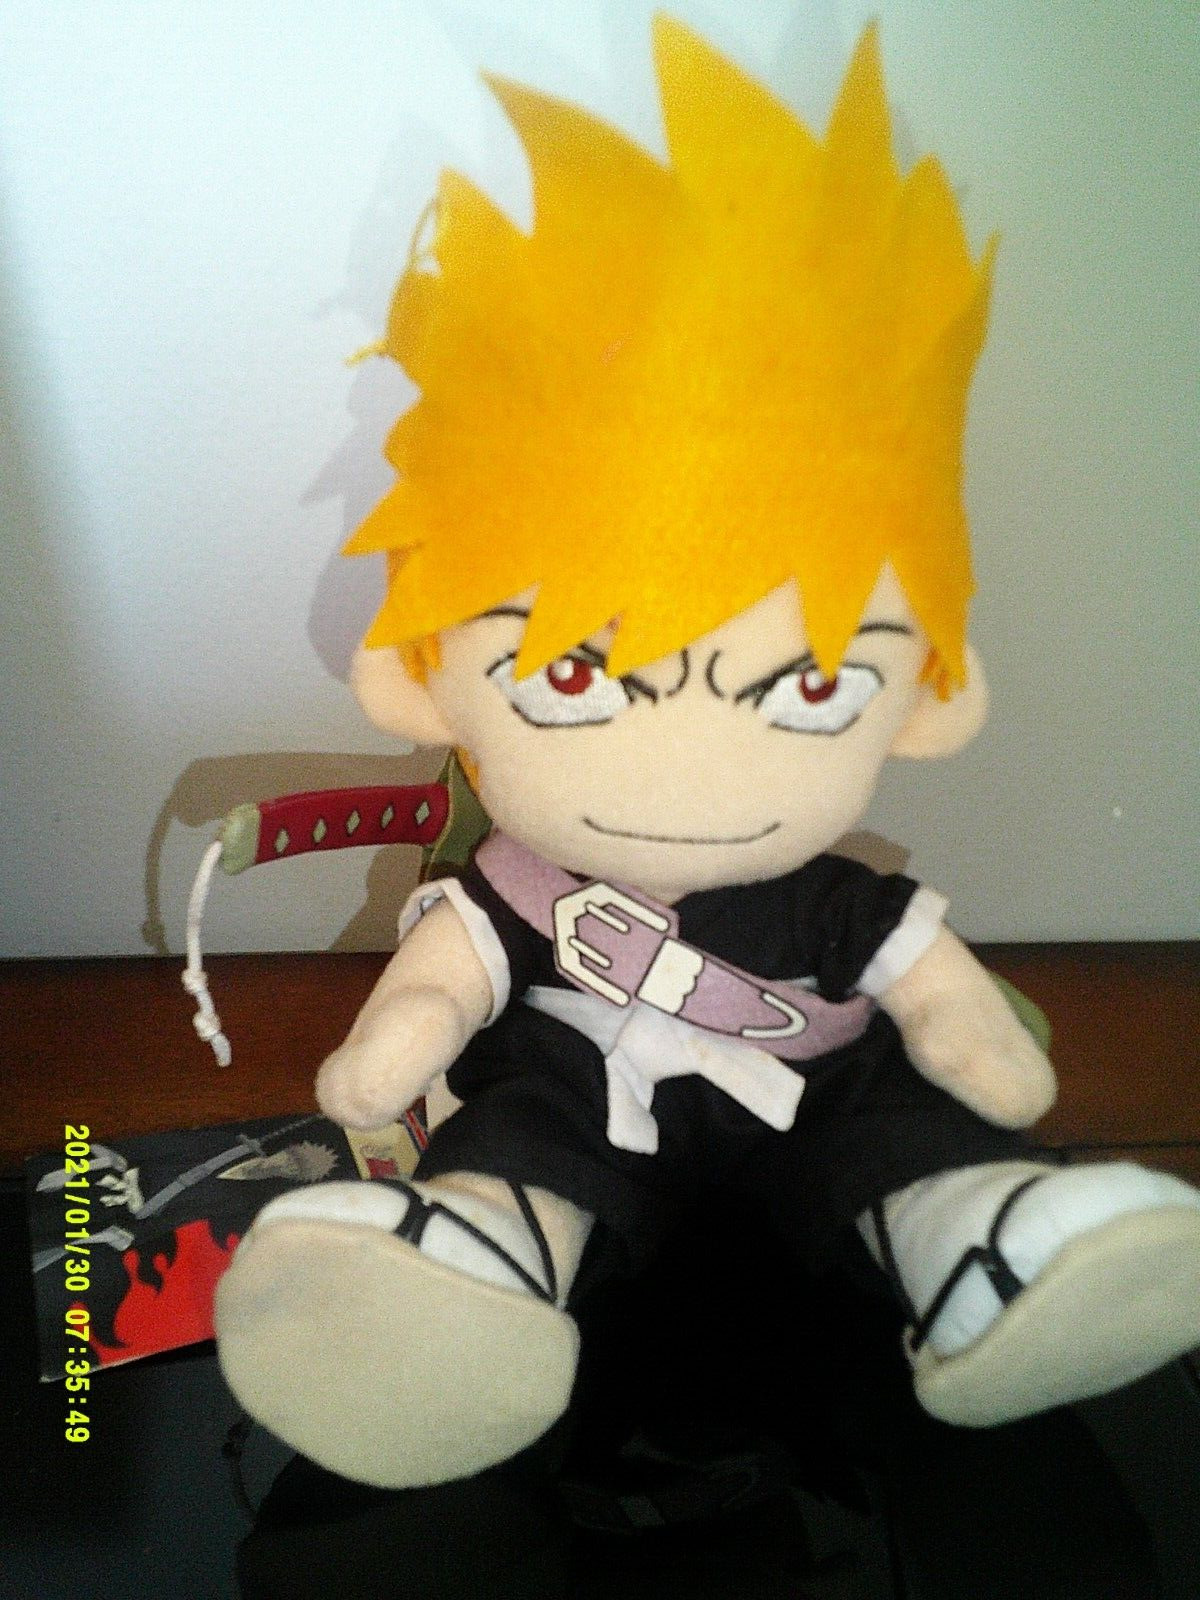 Bleach Shonen Jump With Sword Plush Officially Licensed NWT